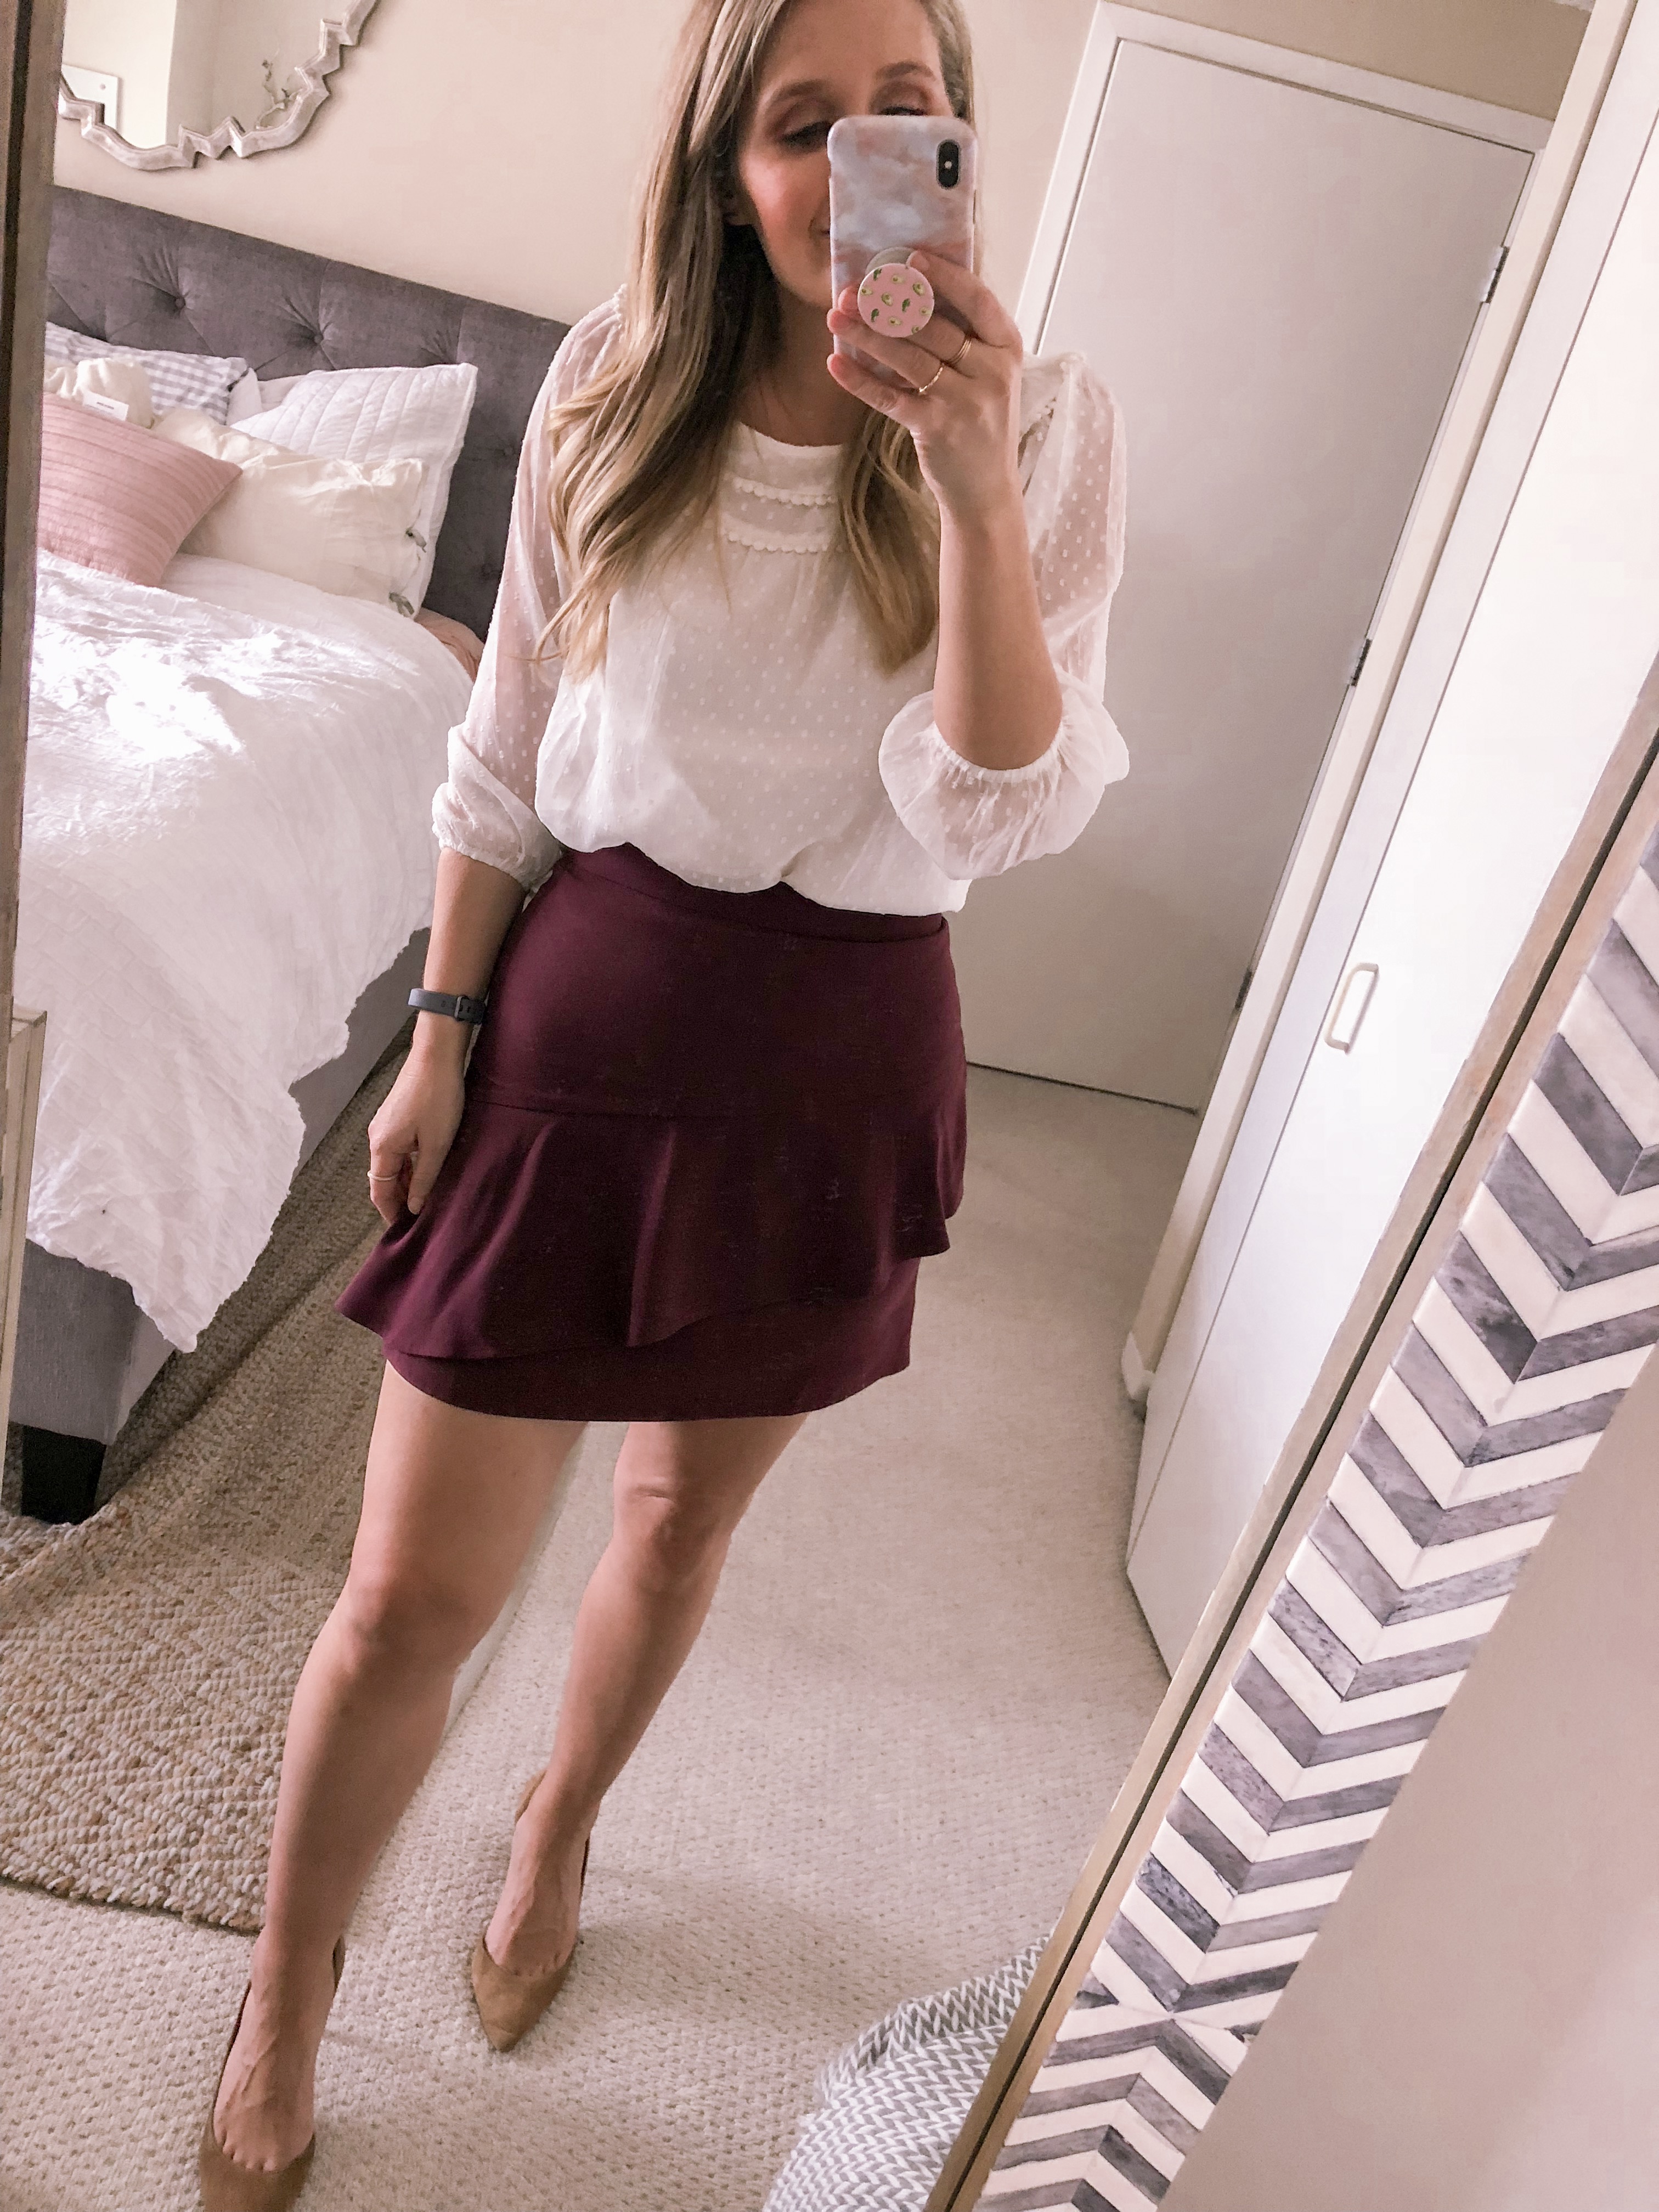 Chicago lifestyle blogger Visions of Vogue styles a LOFT pom blouse with a burgundy asymmetrial ruffled mini skirt for a fall office outfit idea.